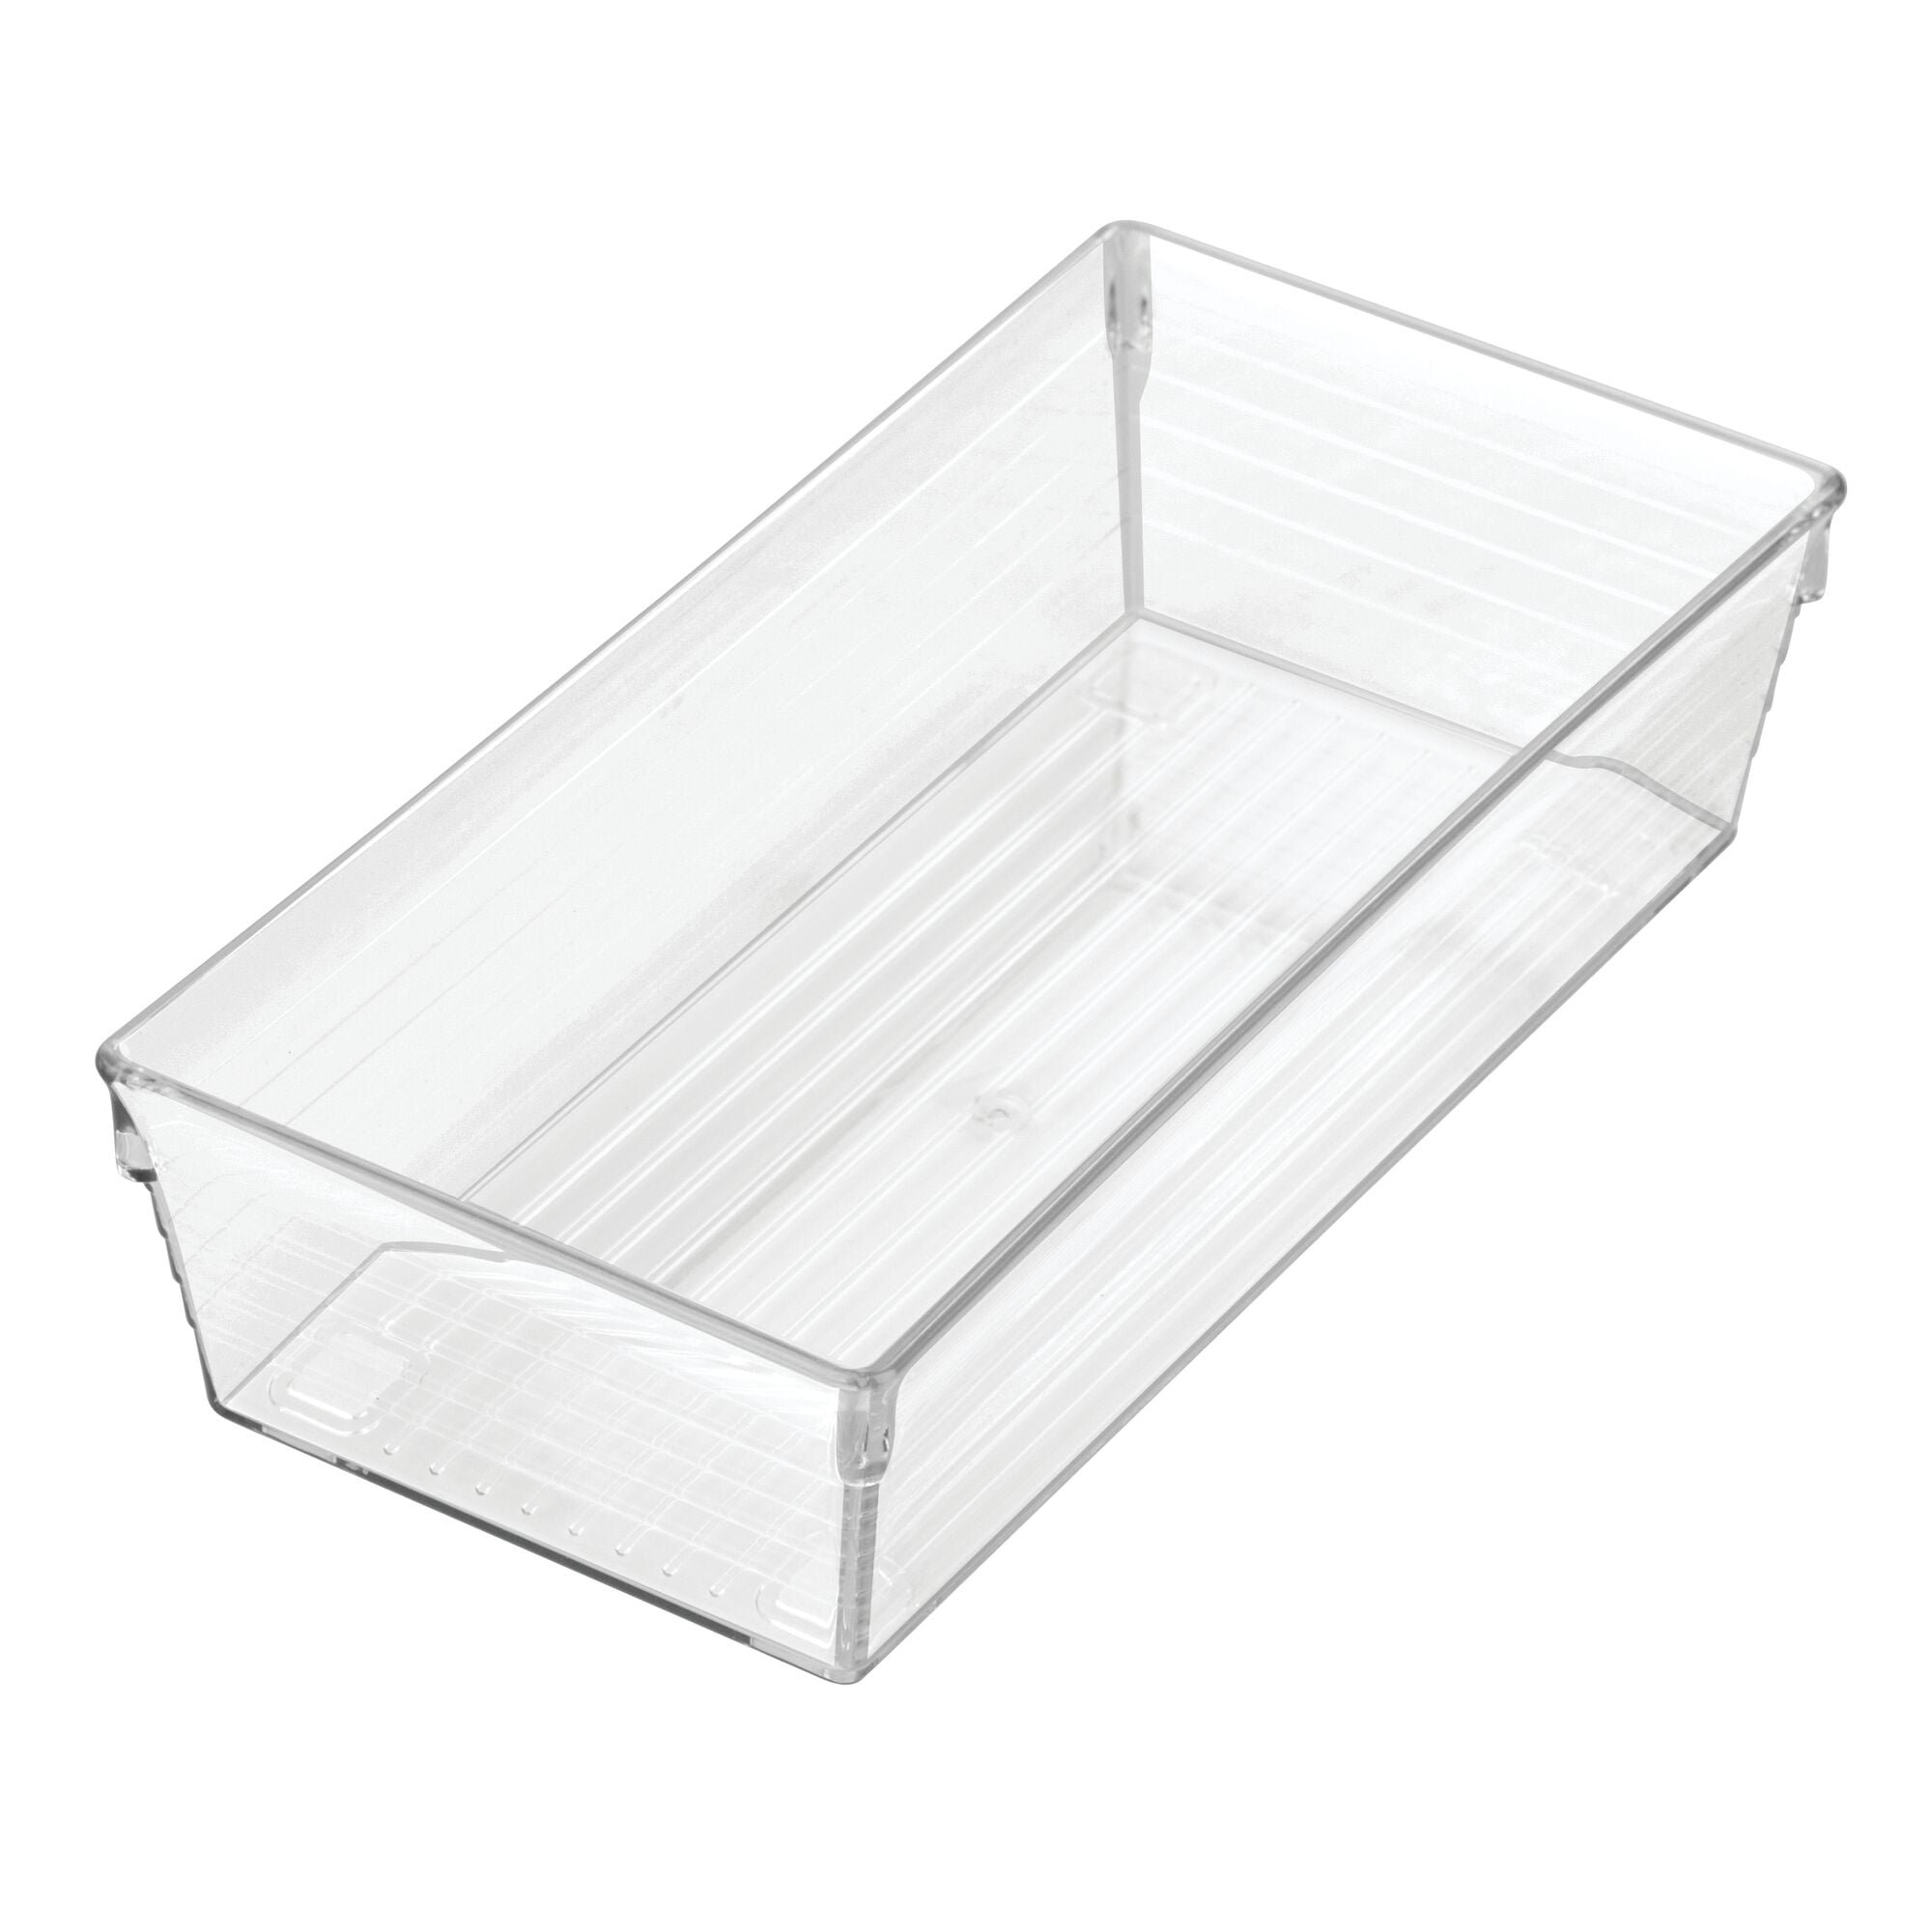 New 6 Section Drawer Organizer From Mainstays In Clear 